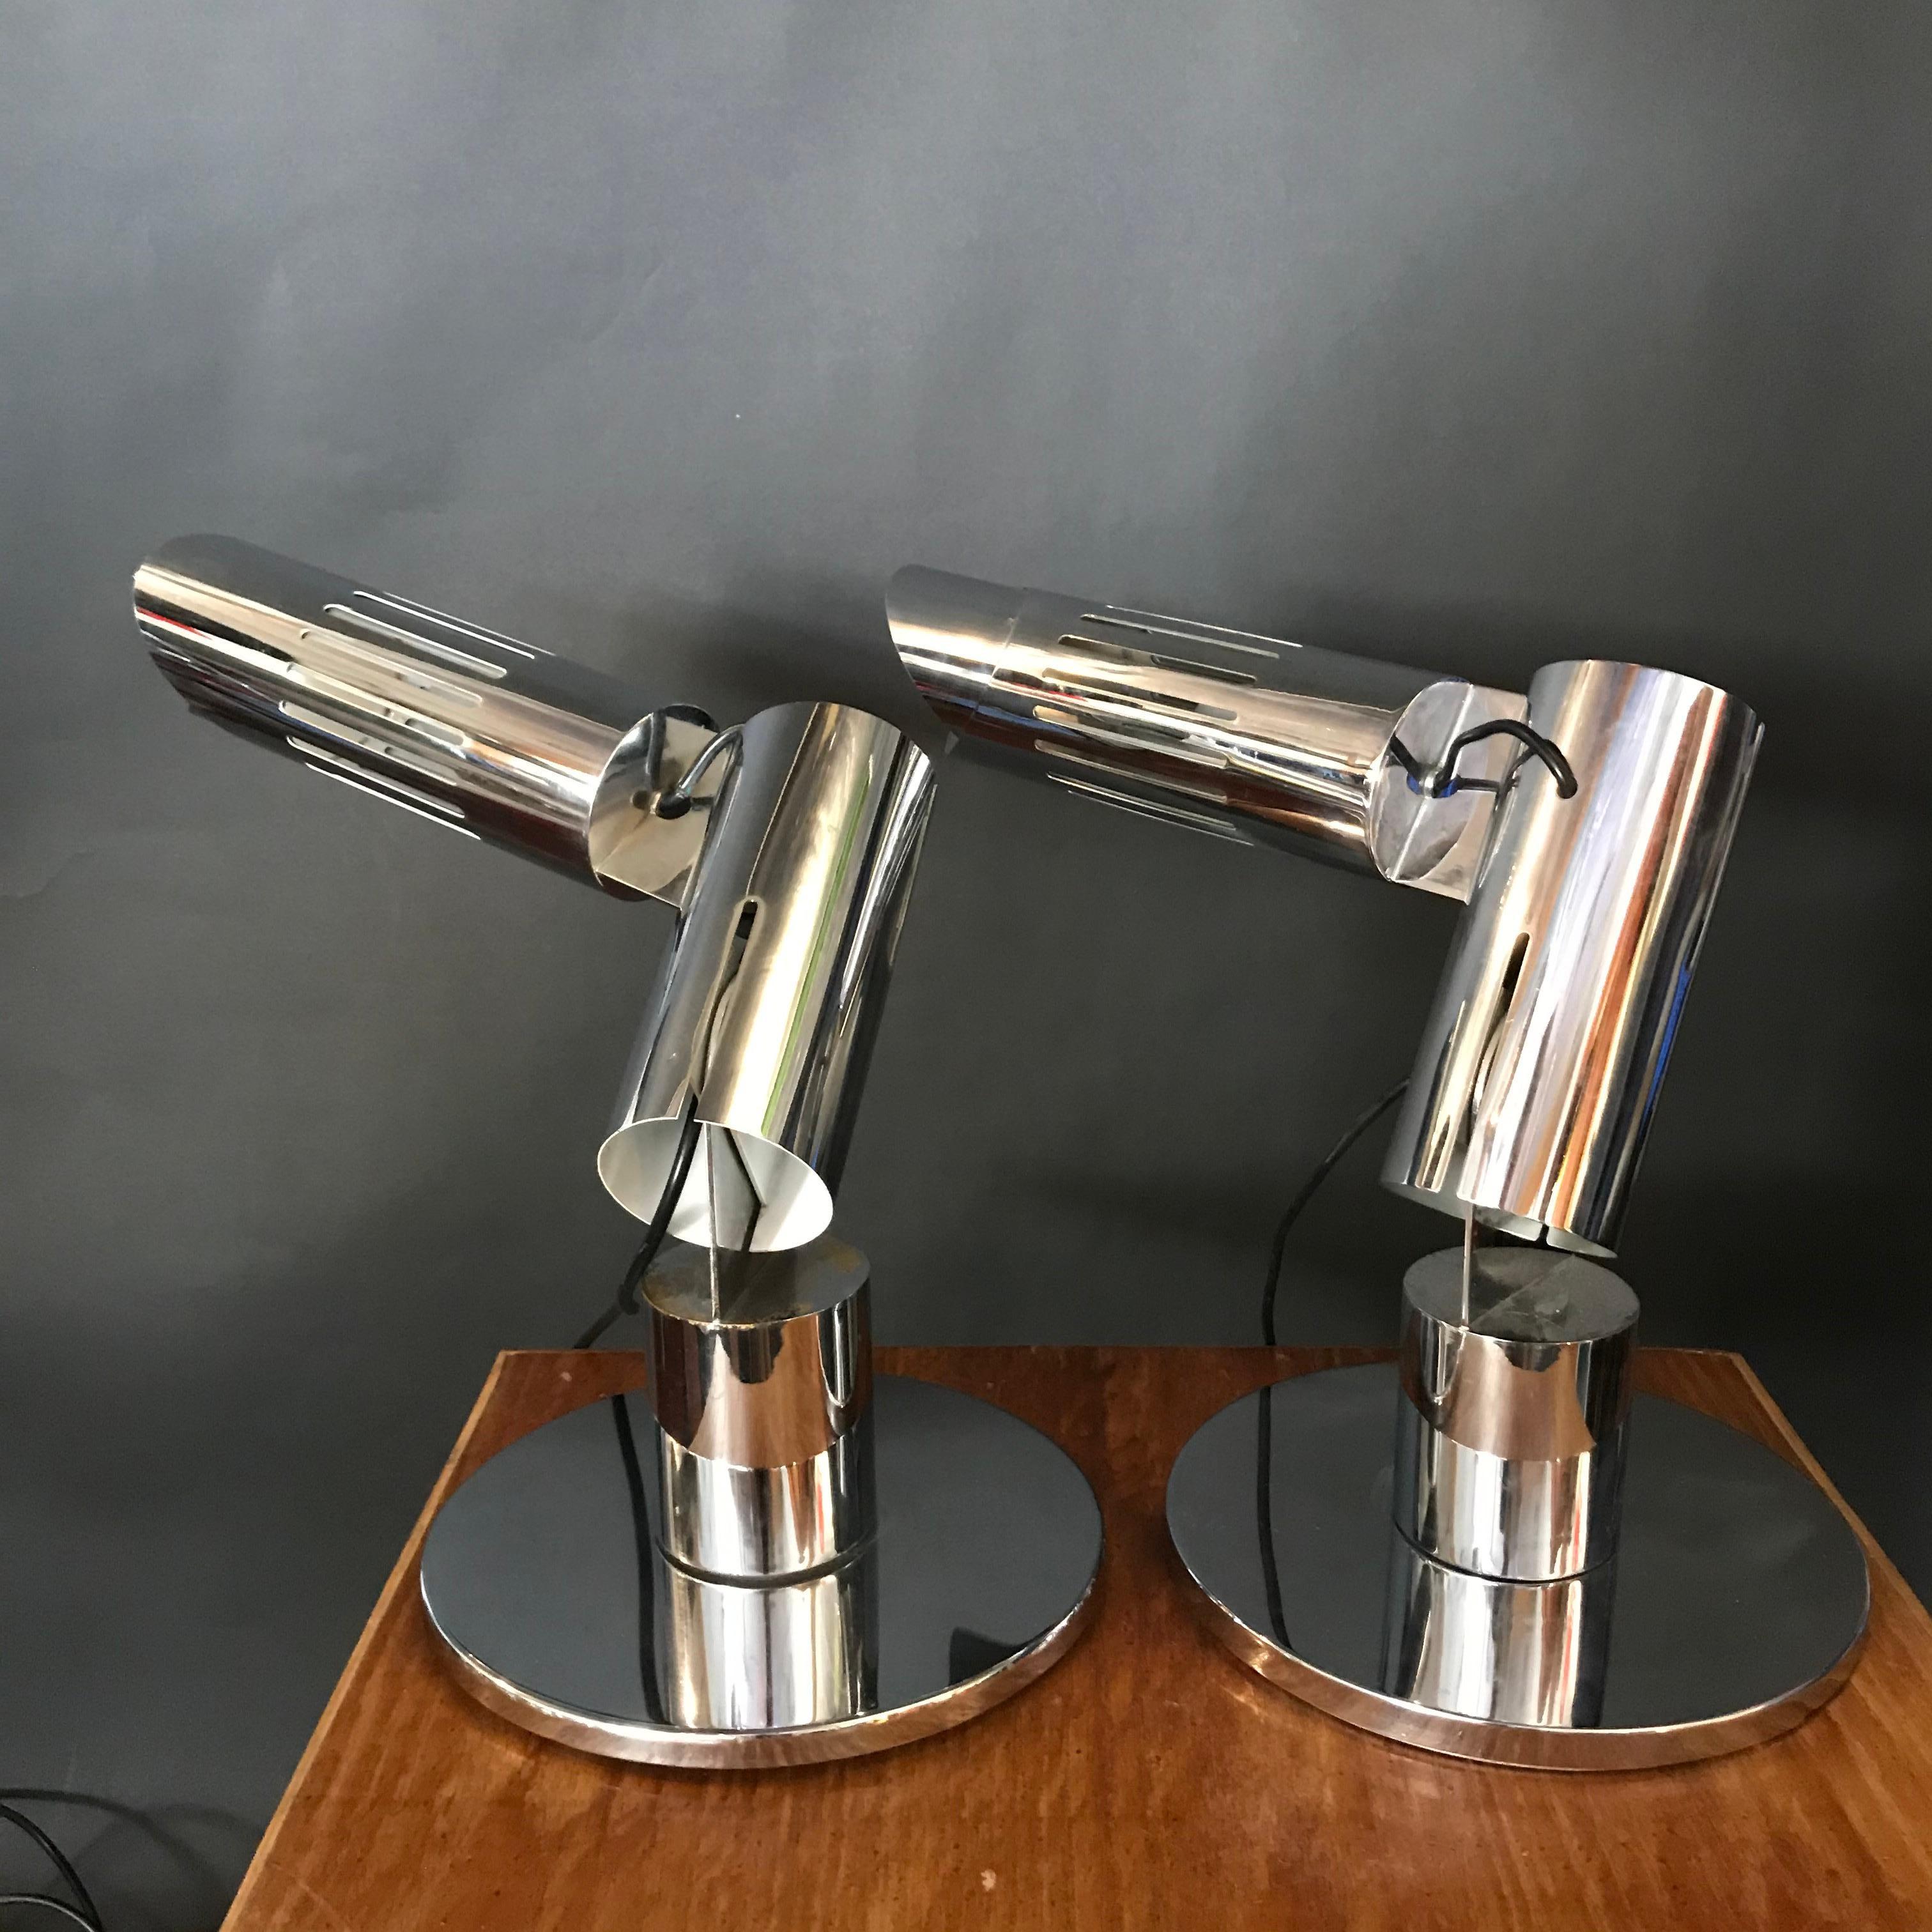 Rare pair of 1970’s Italian Articulating Chrome Plated brass table lamps designed by Gabriel D’Ali made by Francesconi composed of interlocking hinged cylinders and illuminated through slits cut into the outer fixed and an inner rotating cylinder